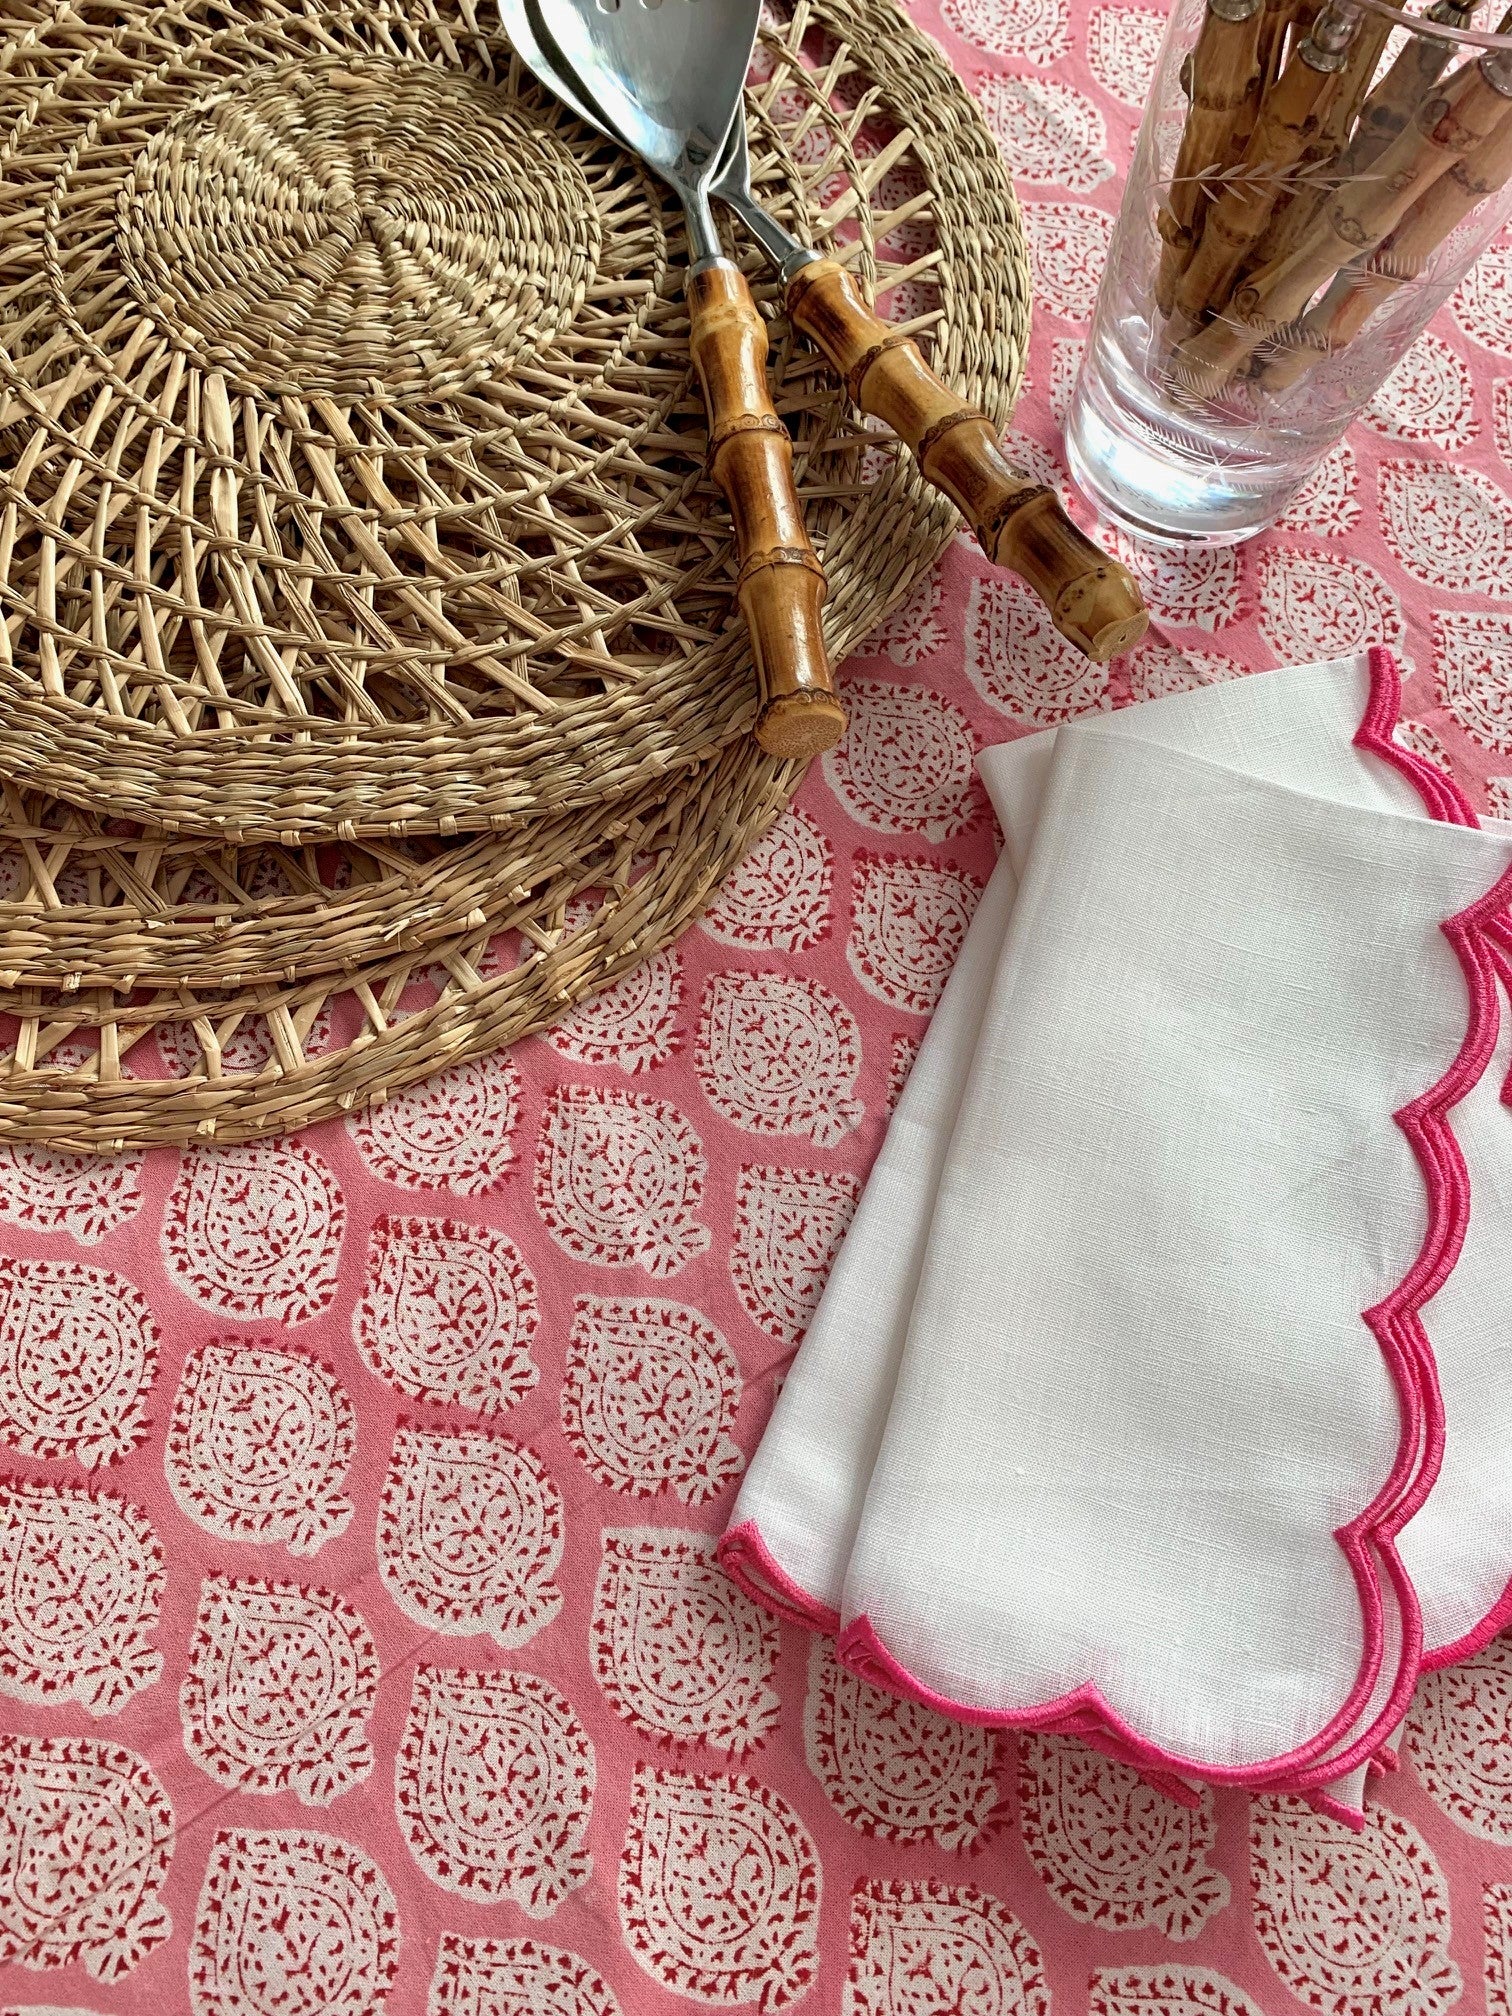 PInk block printed tablecloth with scallop edged linen napkins, raffia placemats and bamboo cutlery.